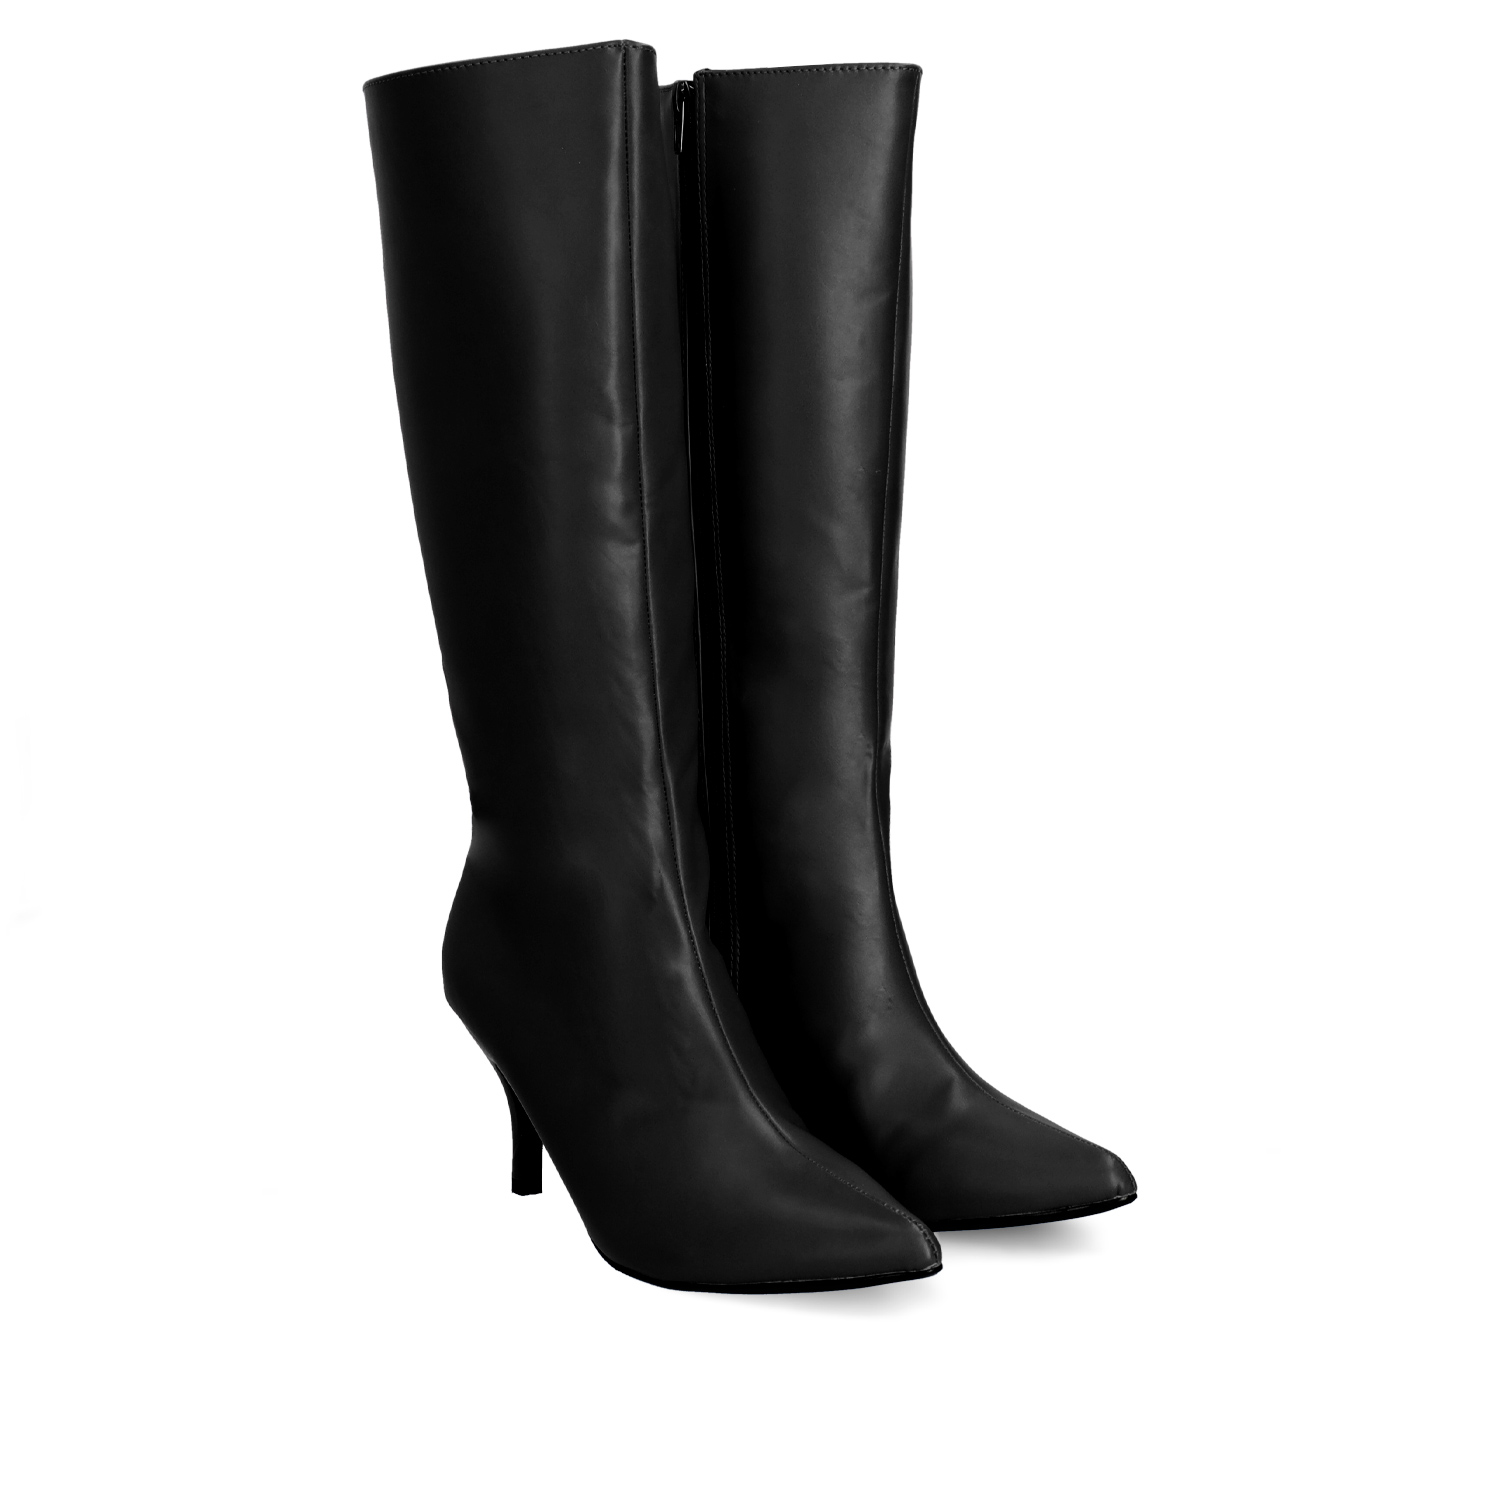 Smooth black colored faux leather boots 